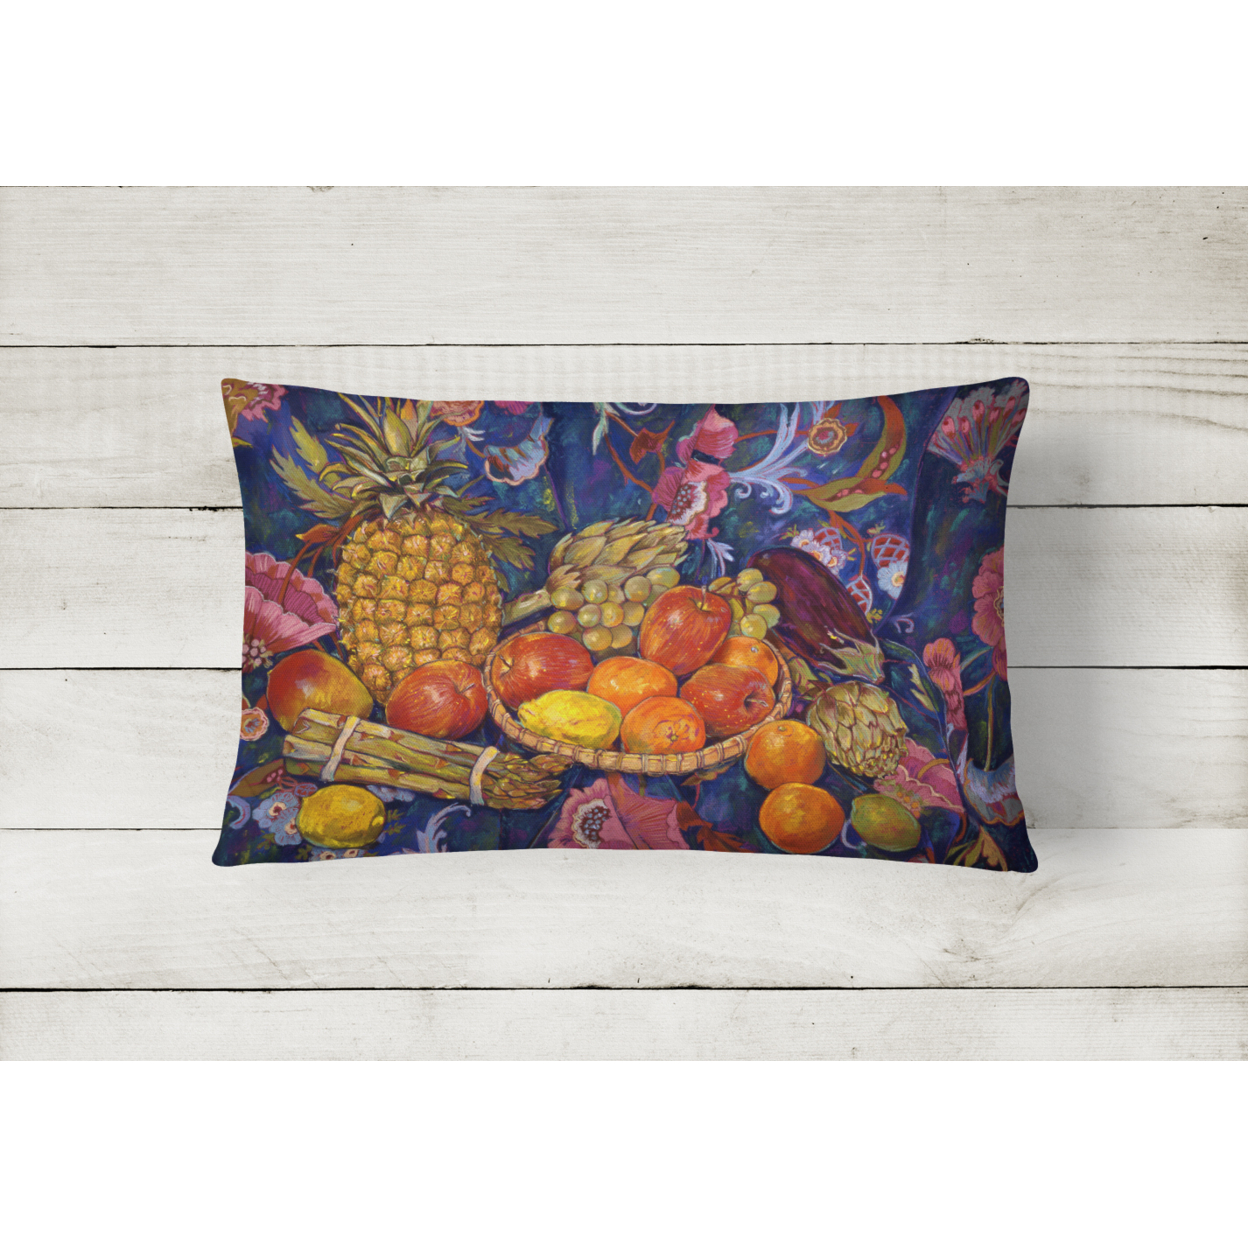 Carolines Treasures DND0018PW1216 Fruit and Vegetables by Neil Drury Canvas Fabric Decorative Pillow, 12H x16W, - image 2 of 3